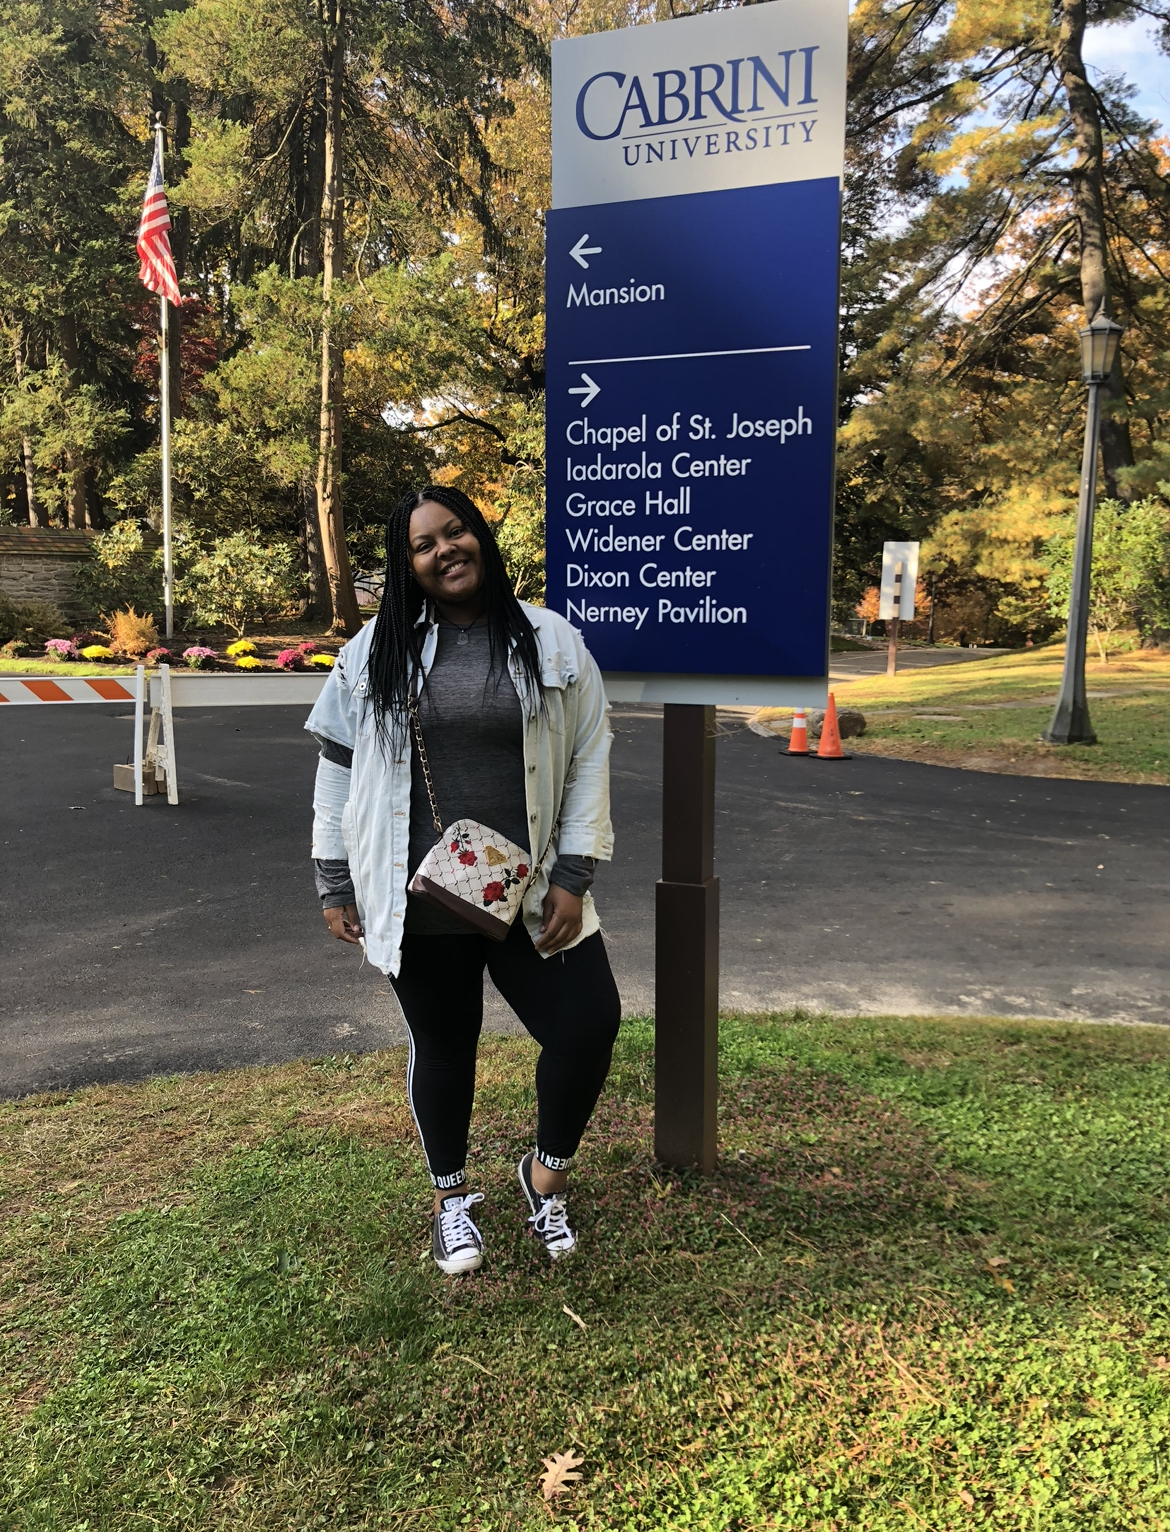 Lashay Smith standing next to a Cabrini sign on campus.